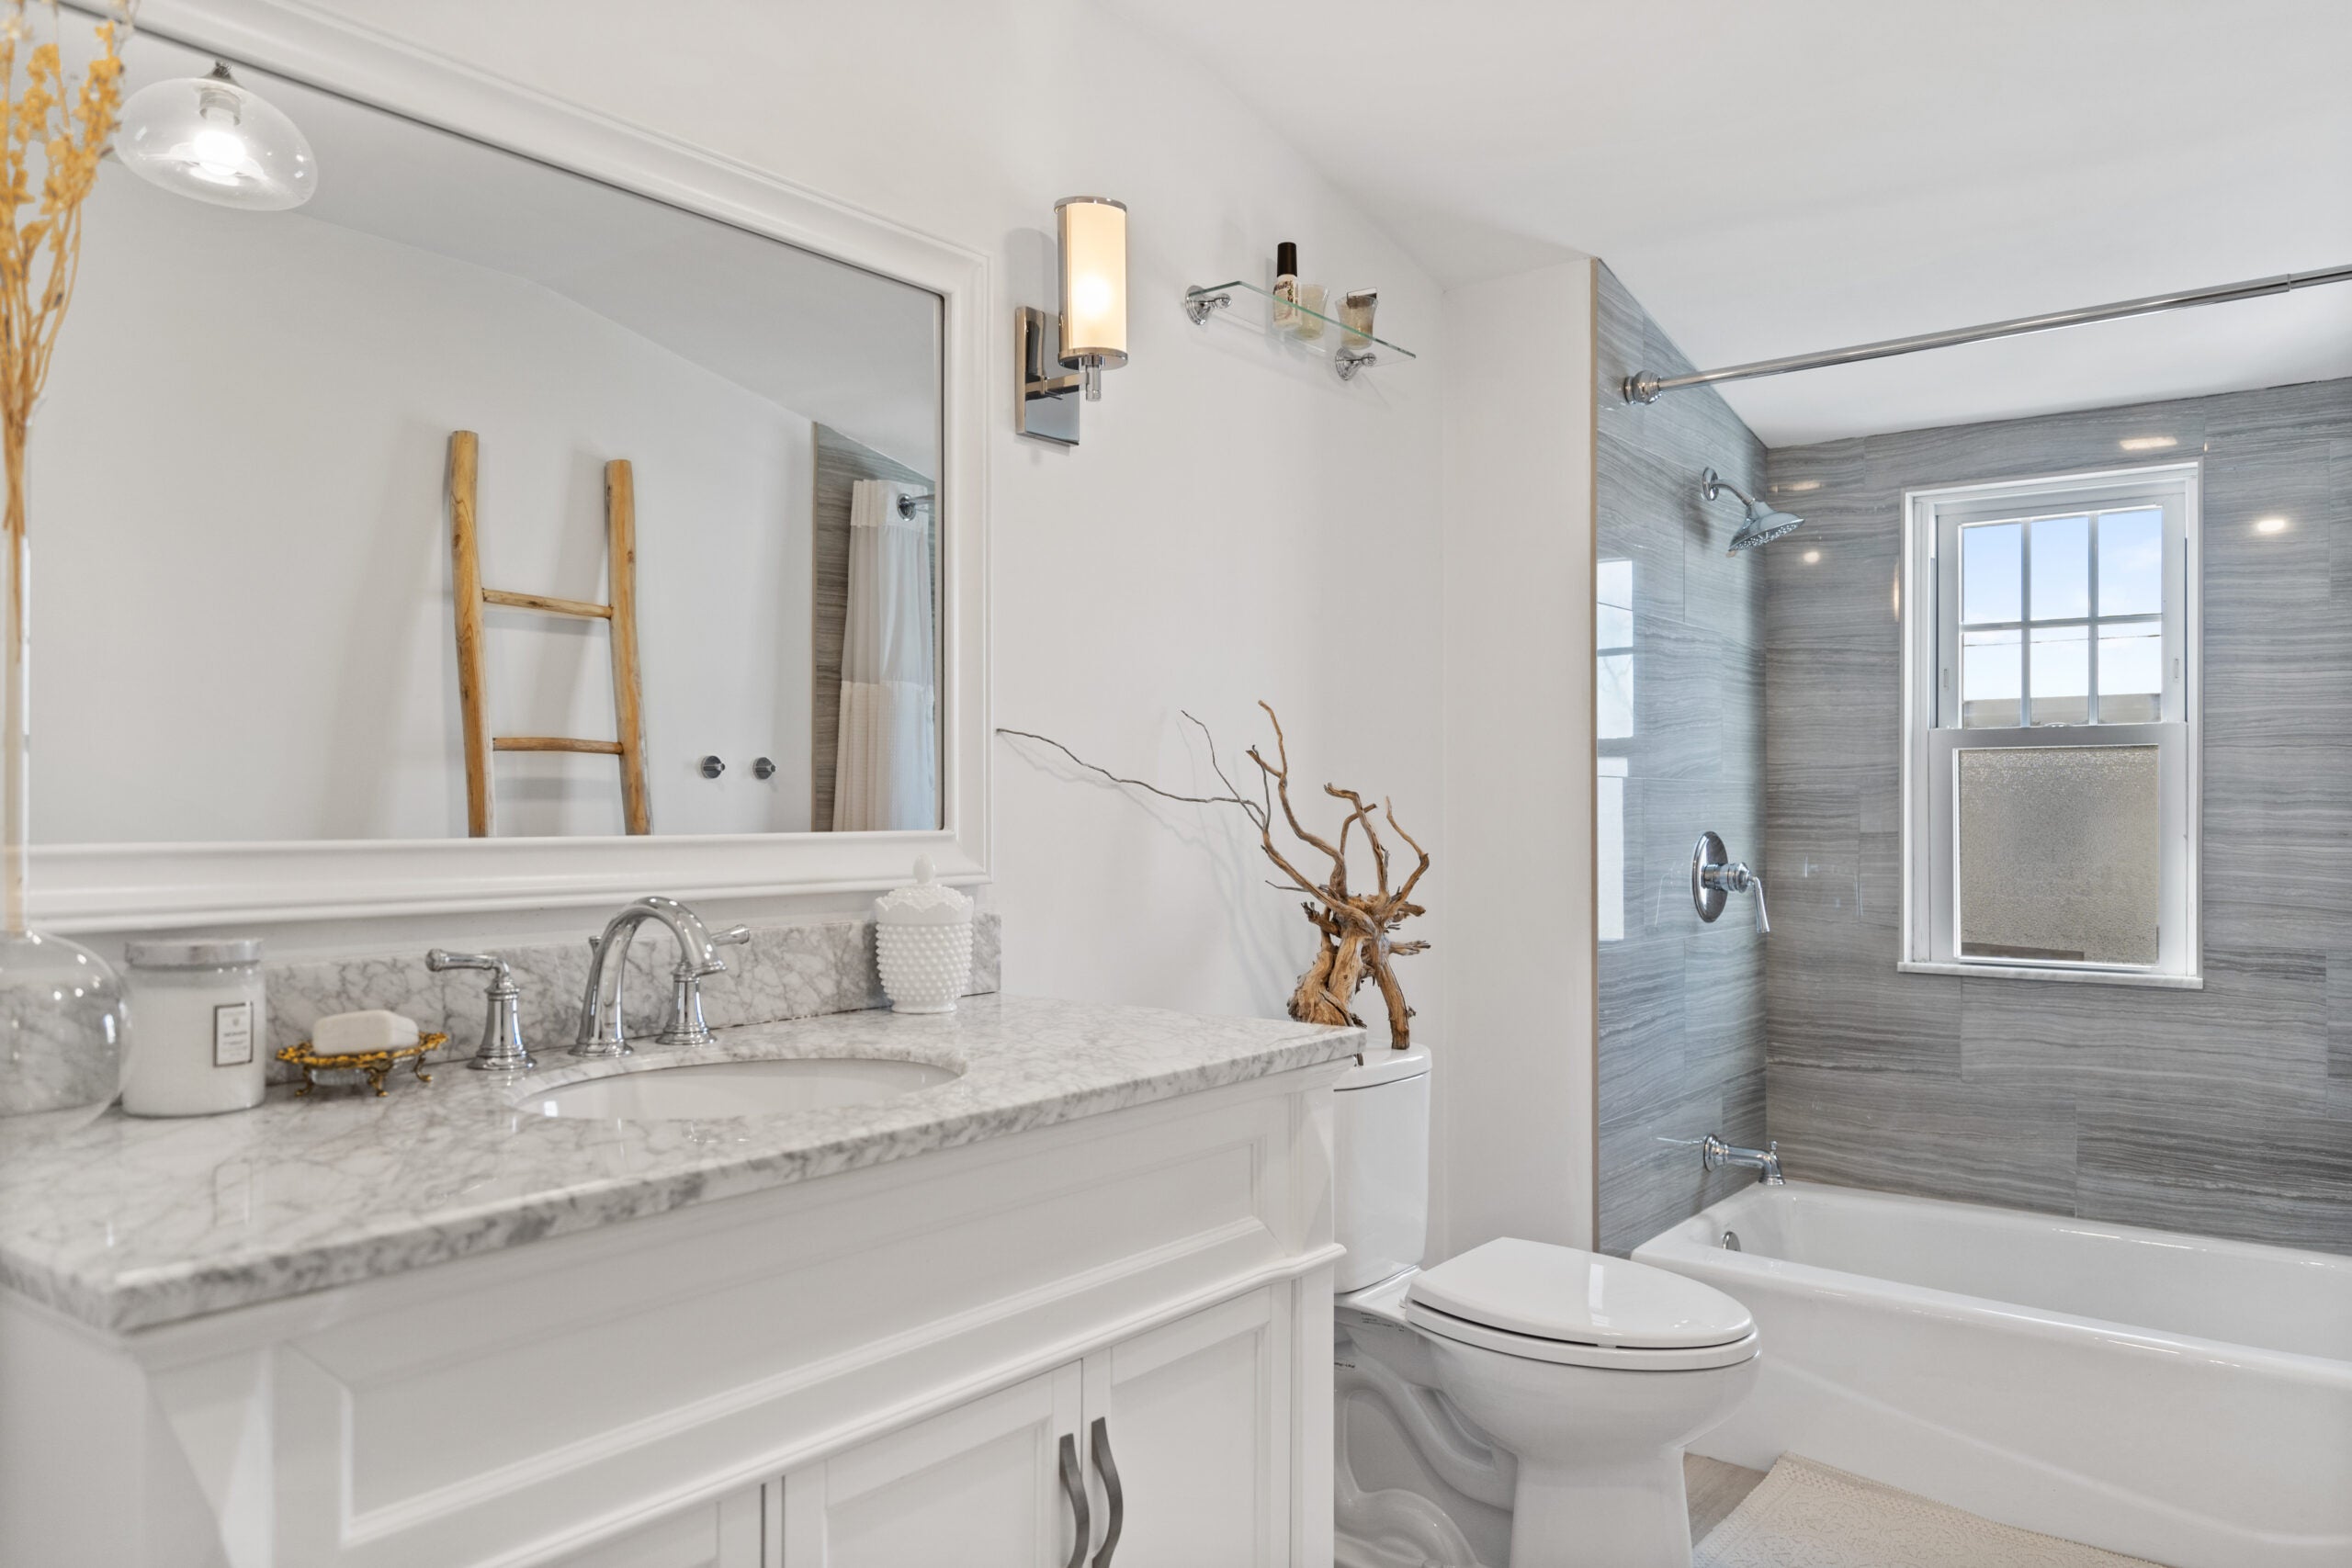 A look at the main bathroom, which has white walls, sconces, a rectangular mirror framed in white to match the cabinetry, and a tub-shower combination. The tile around the shower is gray.